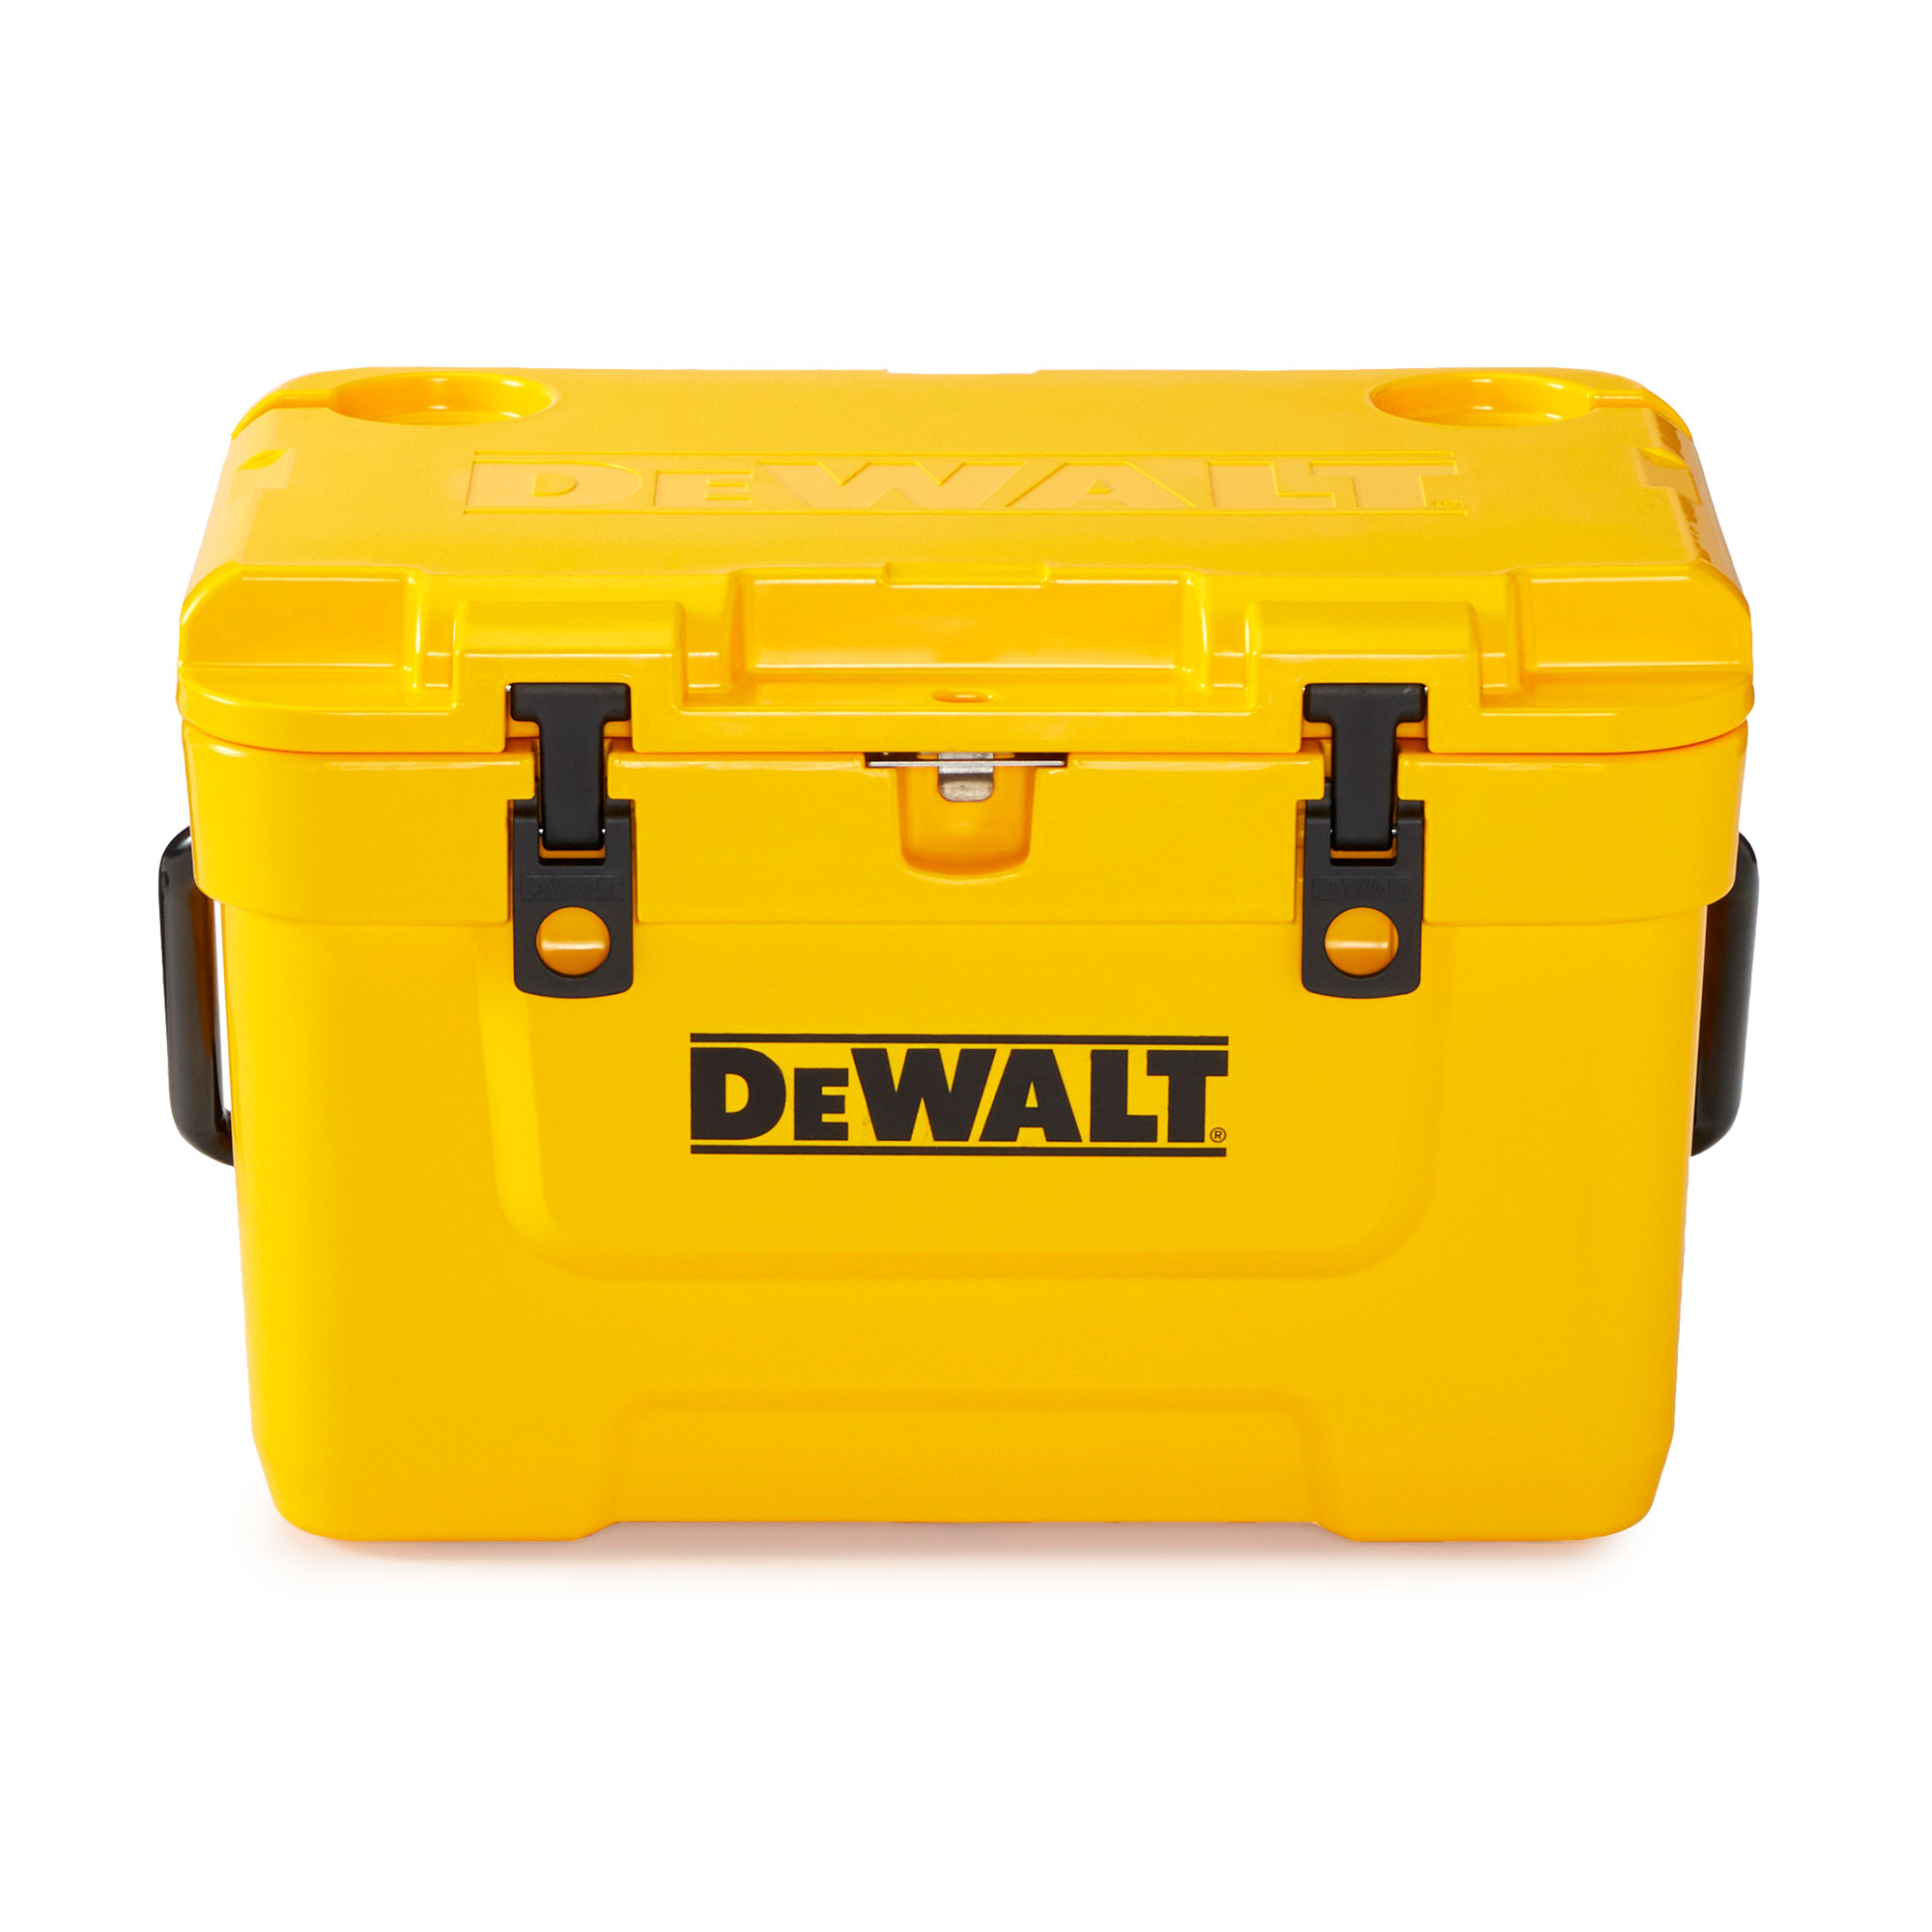 DeWalt 25 Quart Roto Molded Insulated Lunch Box Portable Drink Cooler, Yellow - image 2 of 7